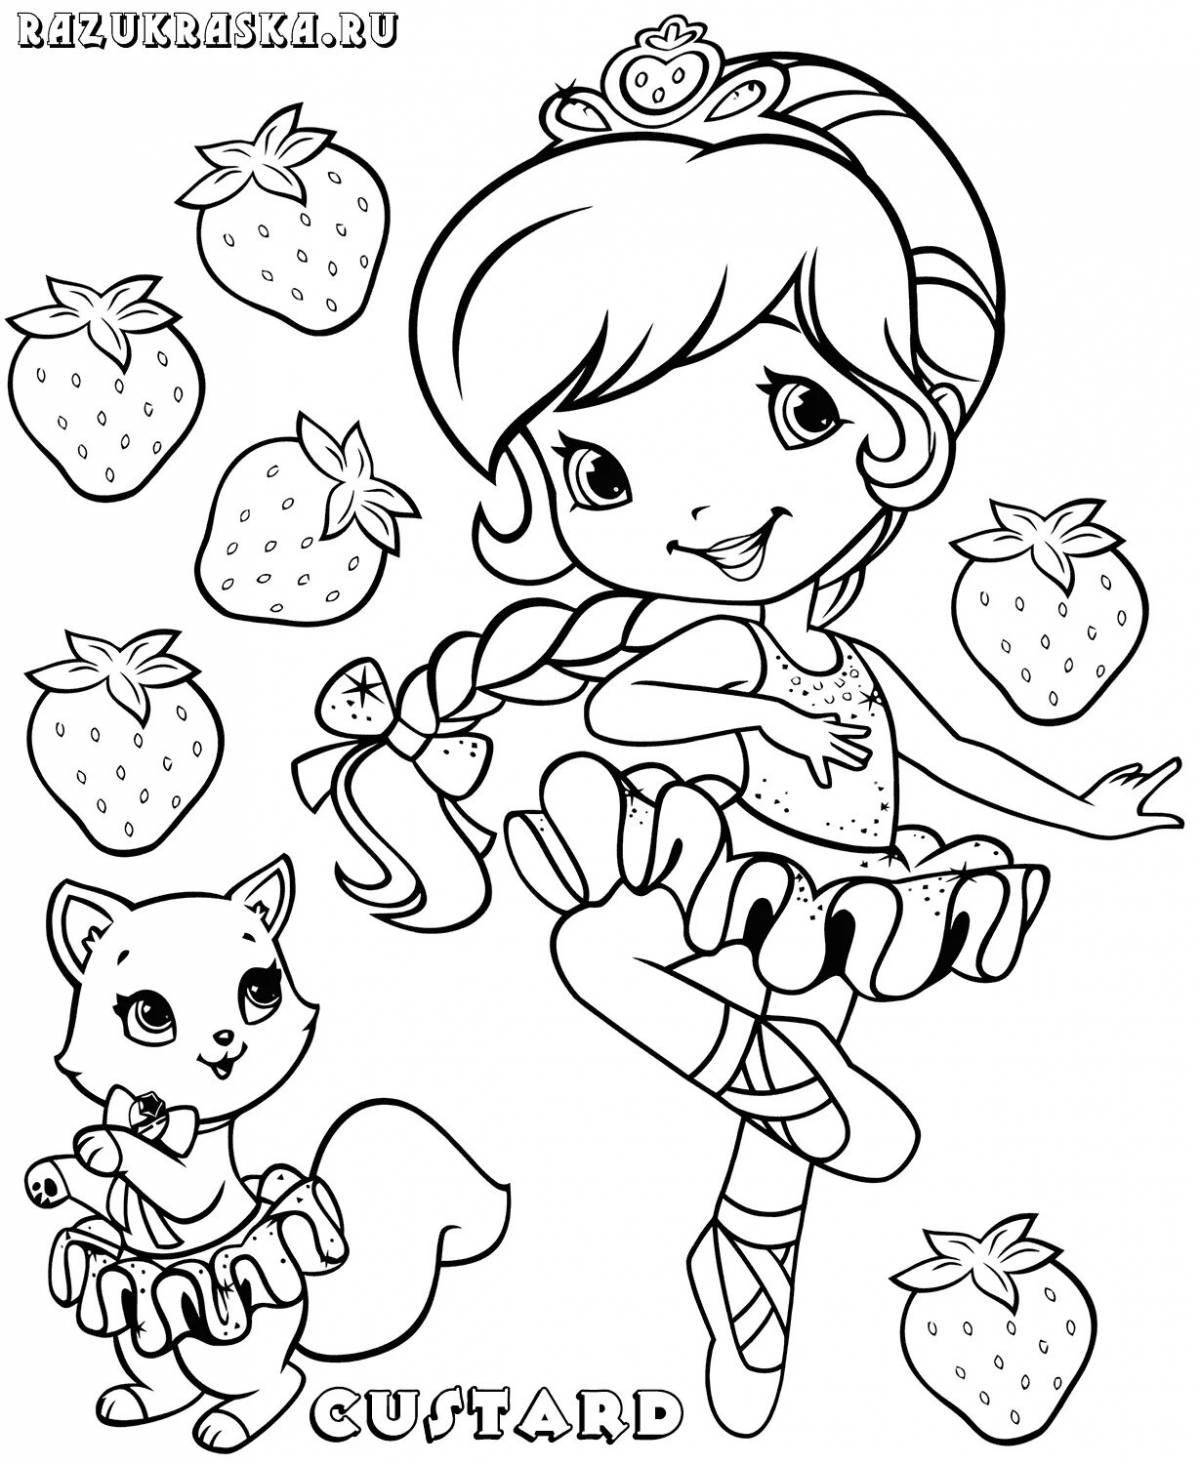 Coloring page energetic strawberry